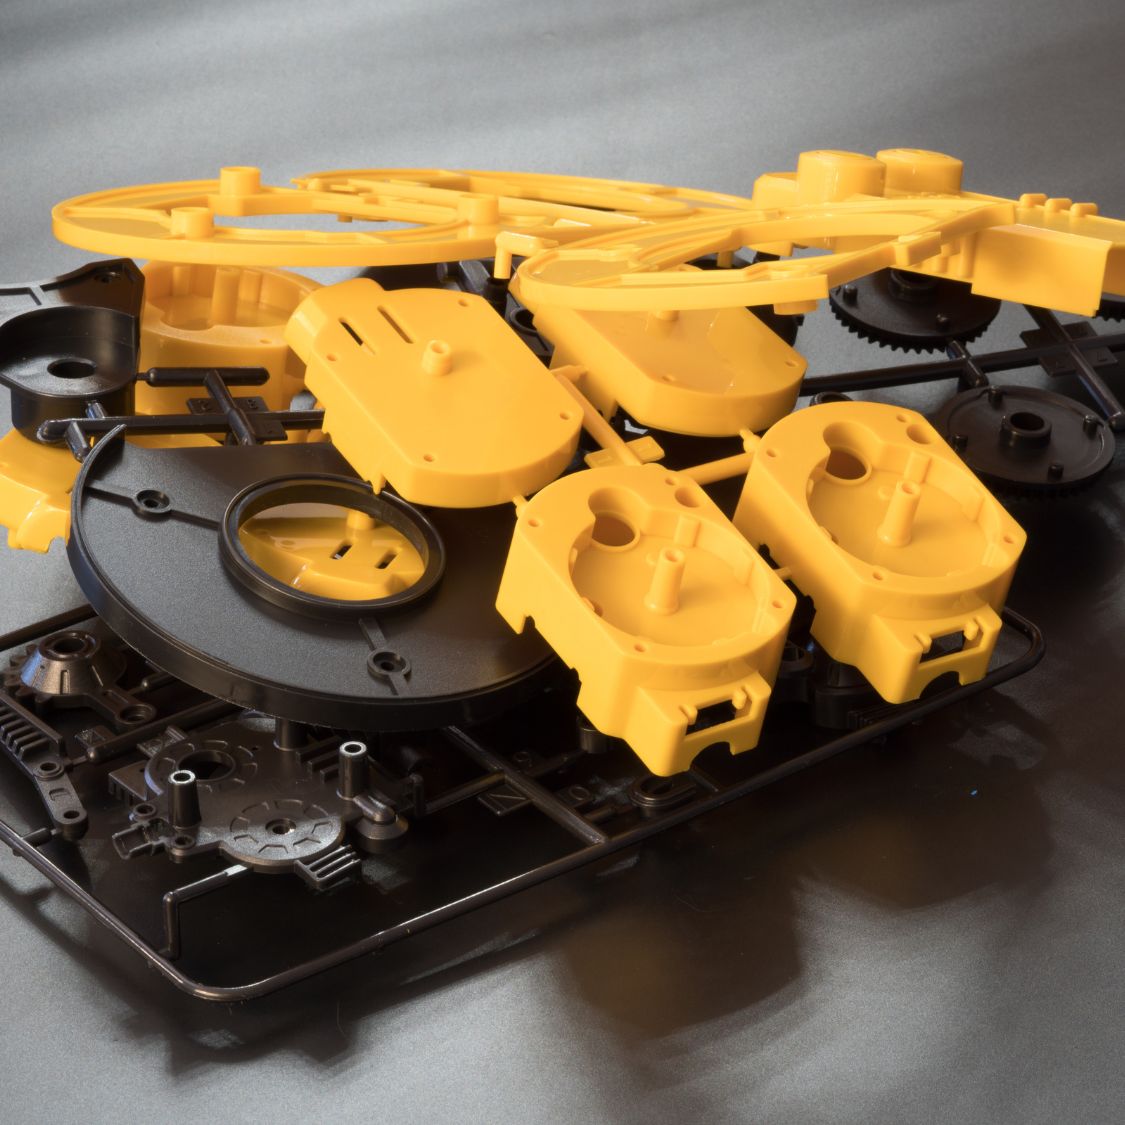 How Does Plastic Injection Molding Work?